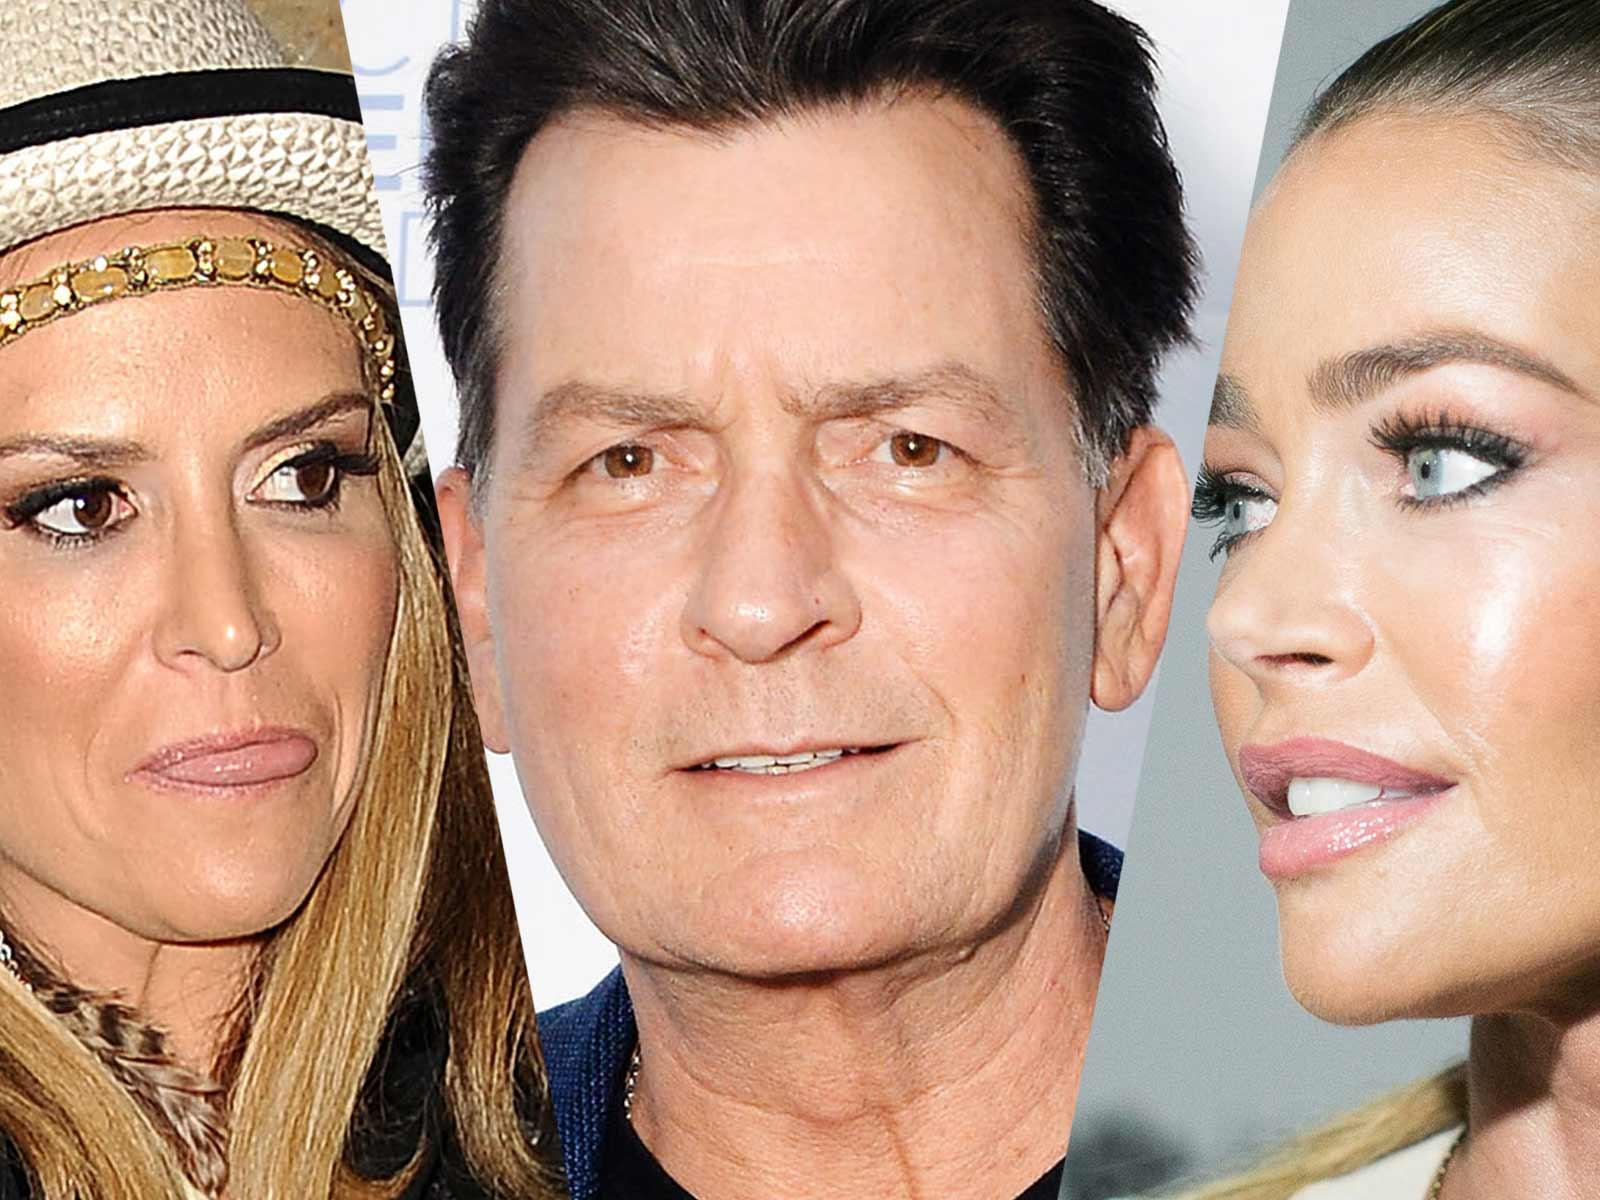 Charlie Sheen Says He’s ‘Blacklisted’ in Hollywood, Needs to Pay Less Child Support